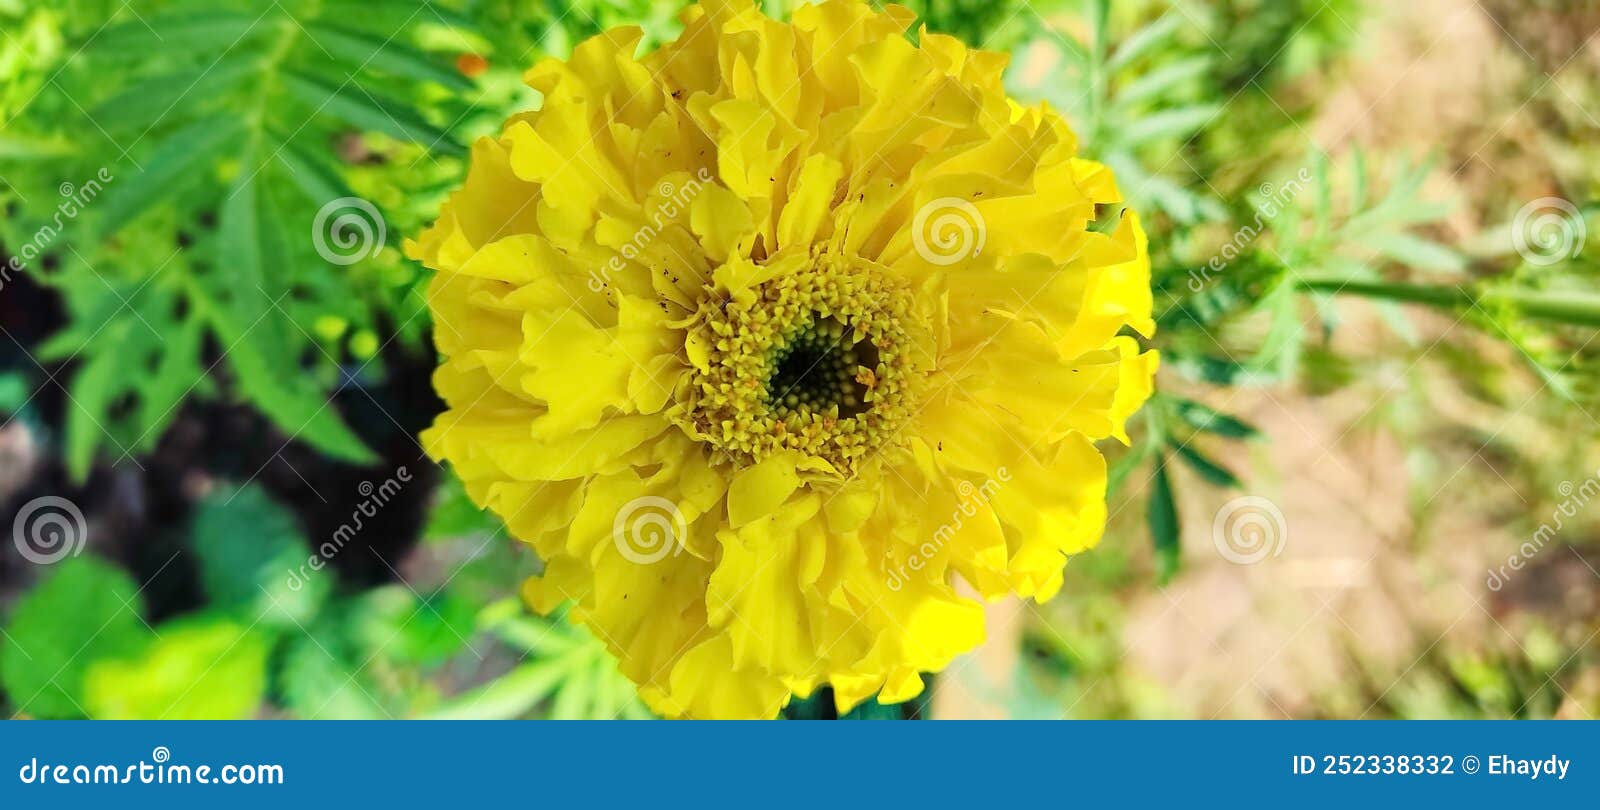 bright yellow marigolds tagetes  are blooming. they originate from america, where they grow wildly from new mexico and arizona